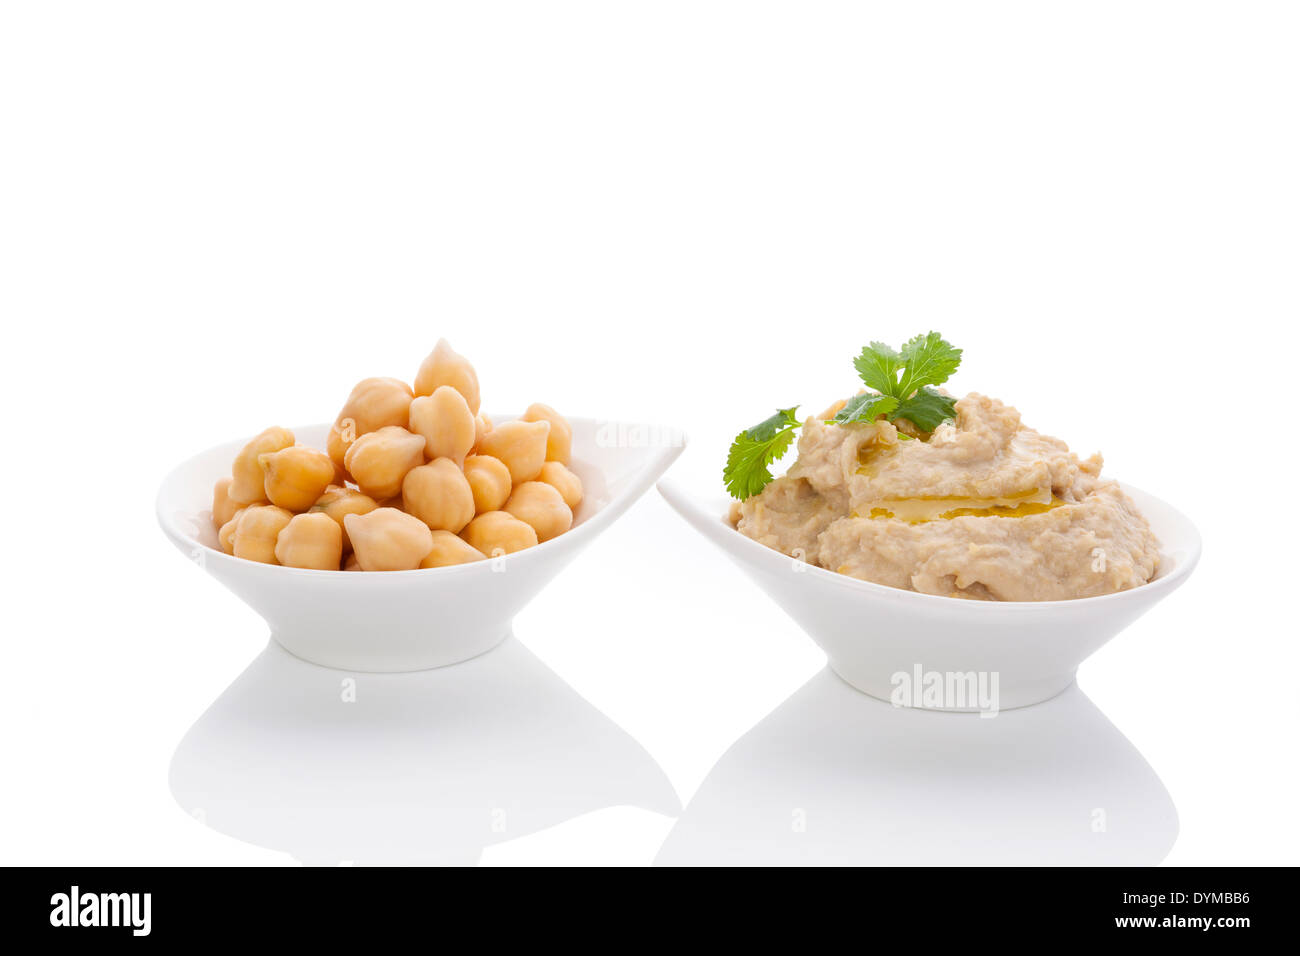 Chickpeas and hummus in bowls isolated on white background. Culinary eastern cuisine. Stock Photo